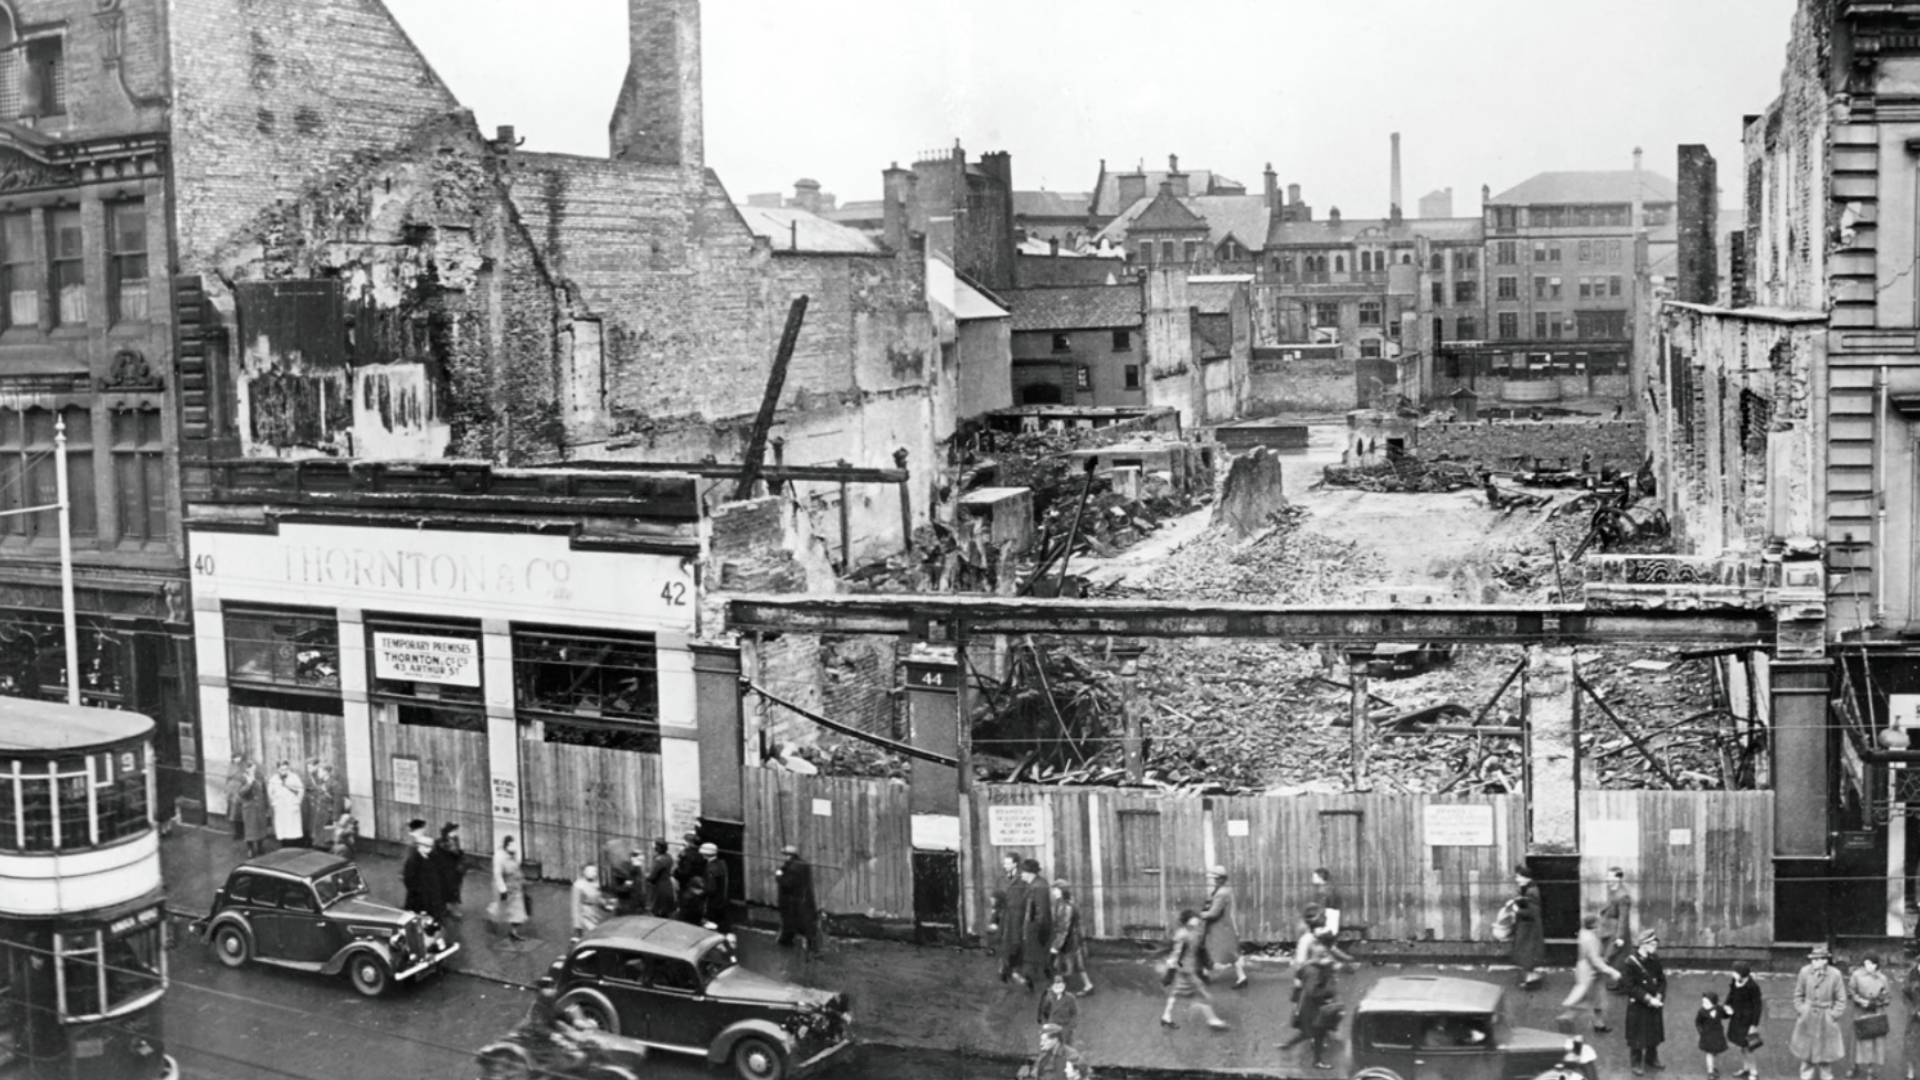 Only rubble remains where once stood The Ulster Arcade (Brands) at 44-46 Donegall Place, Belfast. The clearance of buildings means that Callendar Street and Arthur Street can be seen in the background.